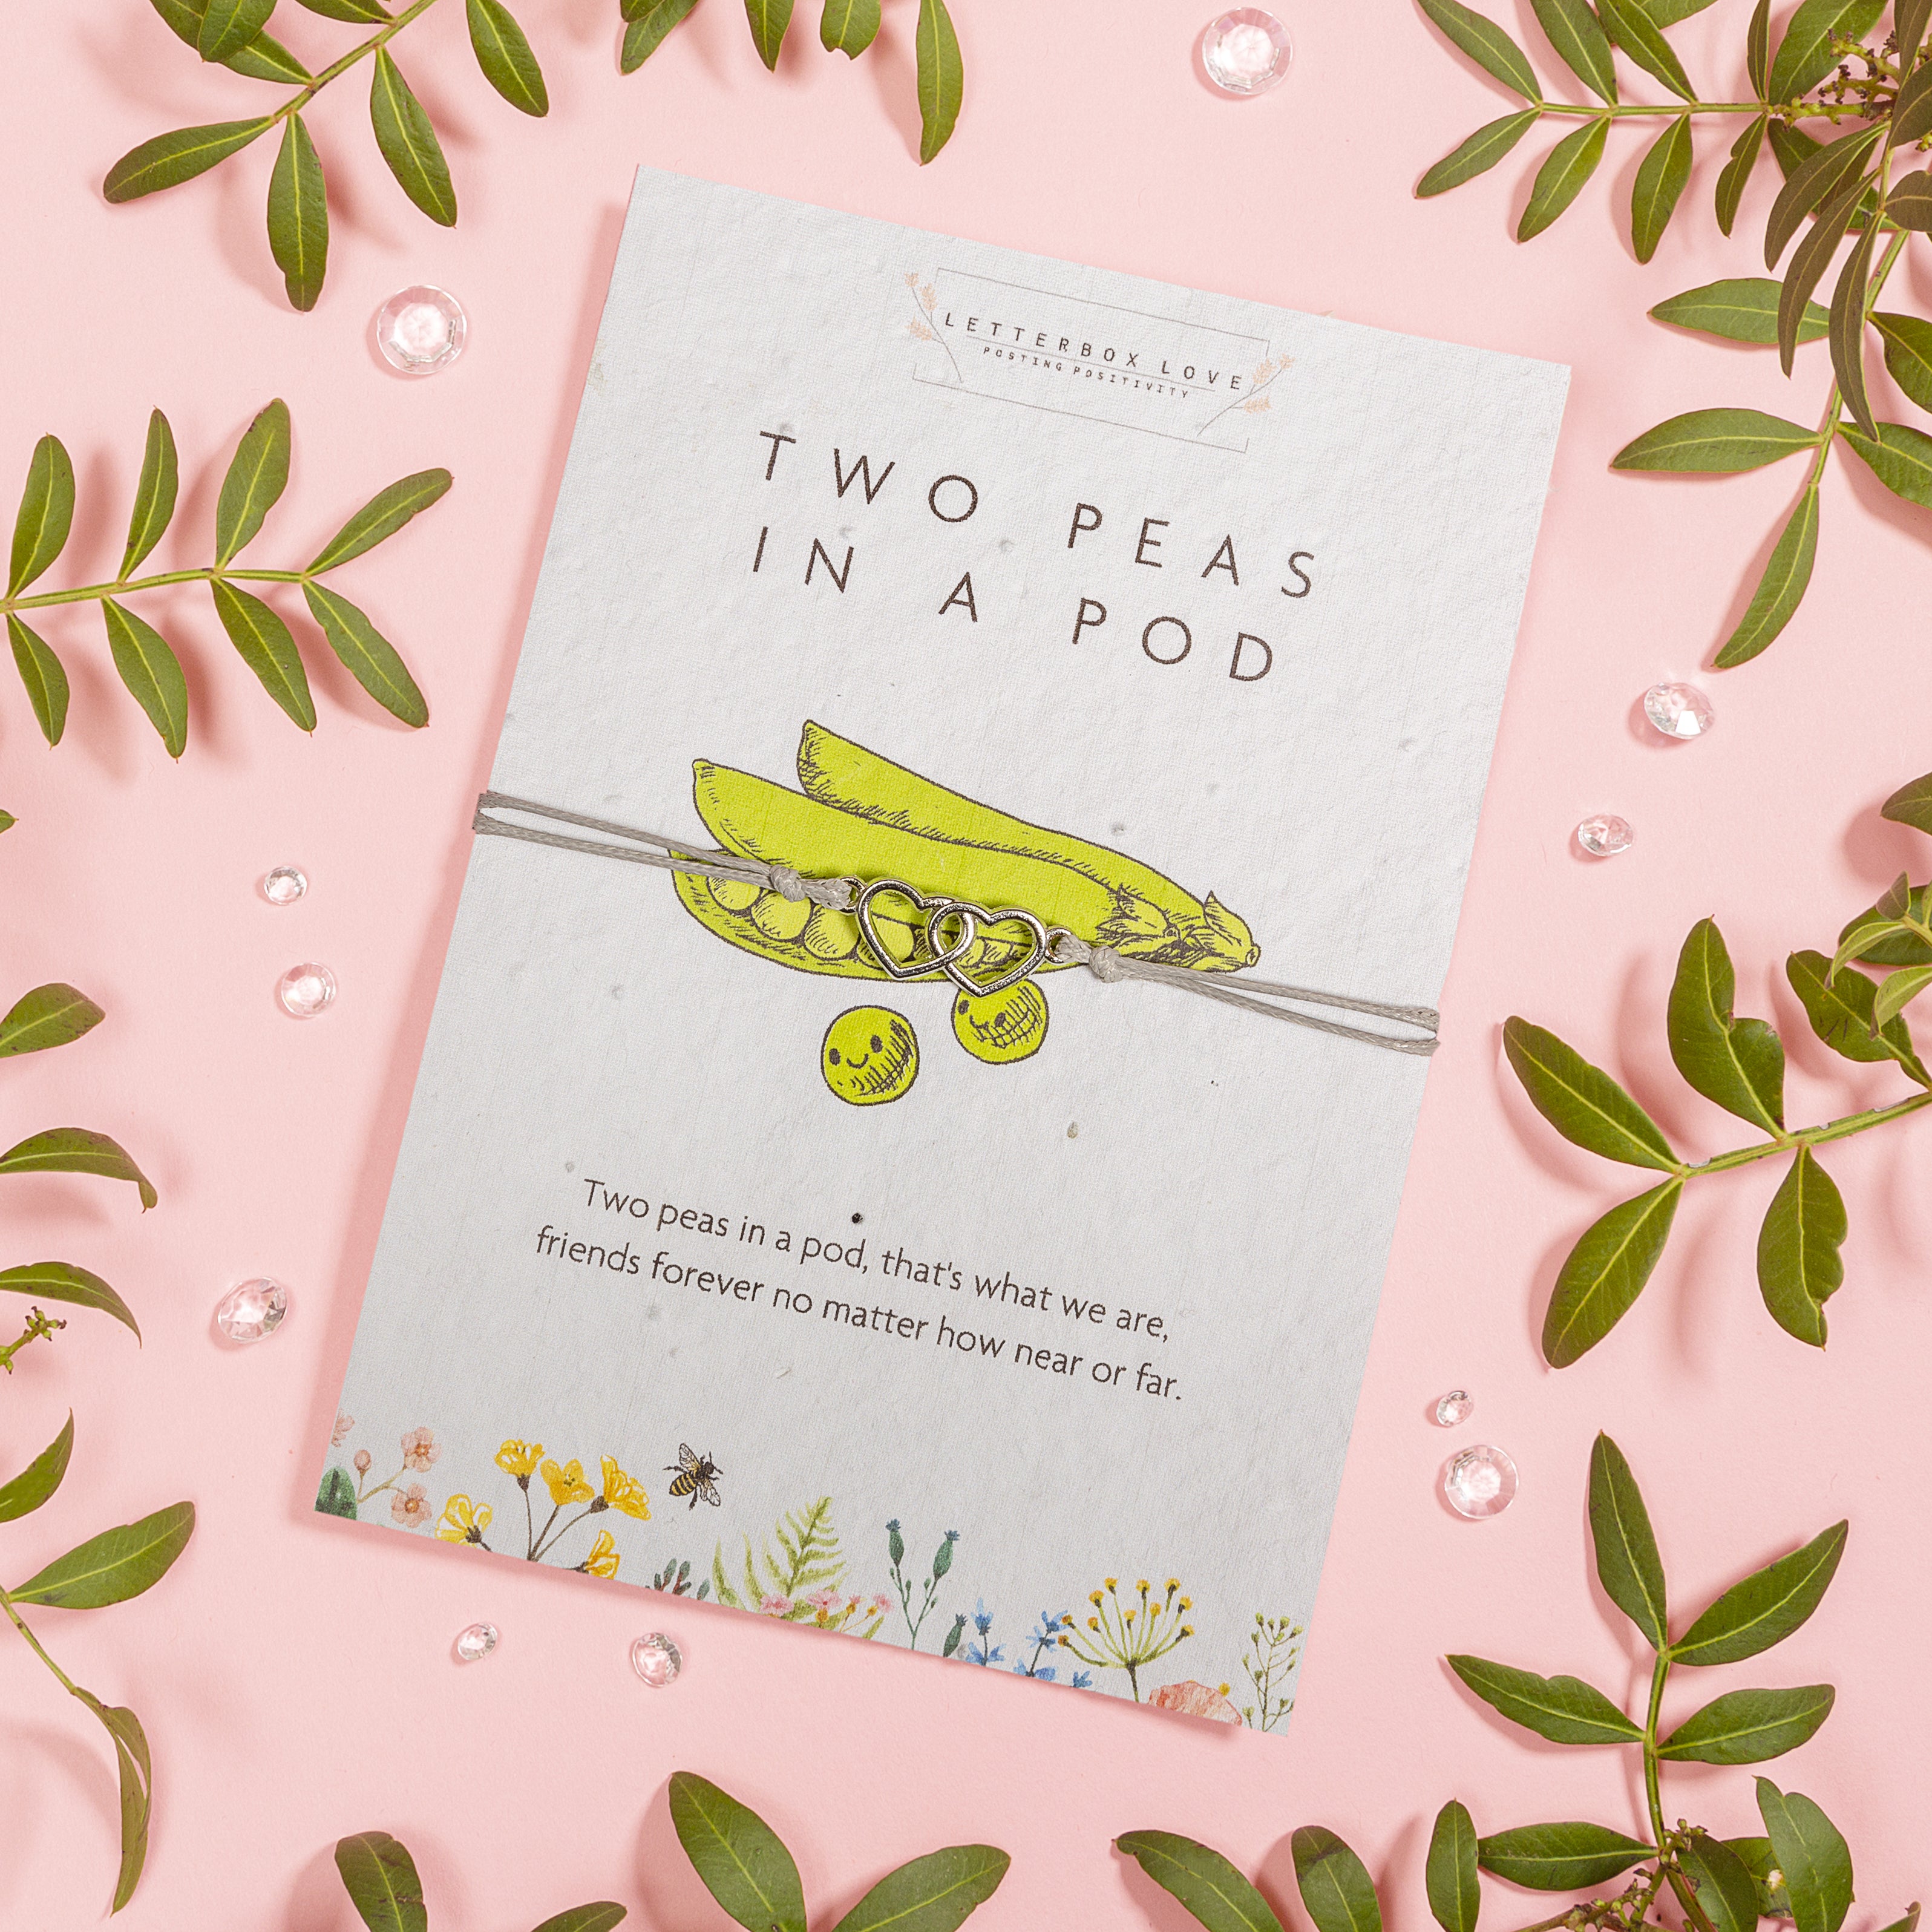 Letterbox Love Seed Card & Wish Bracelet - Two Peas in a Pod